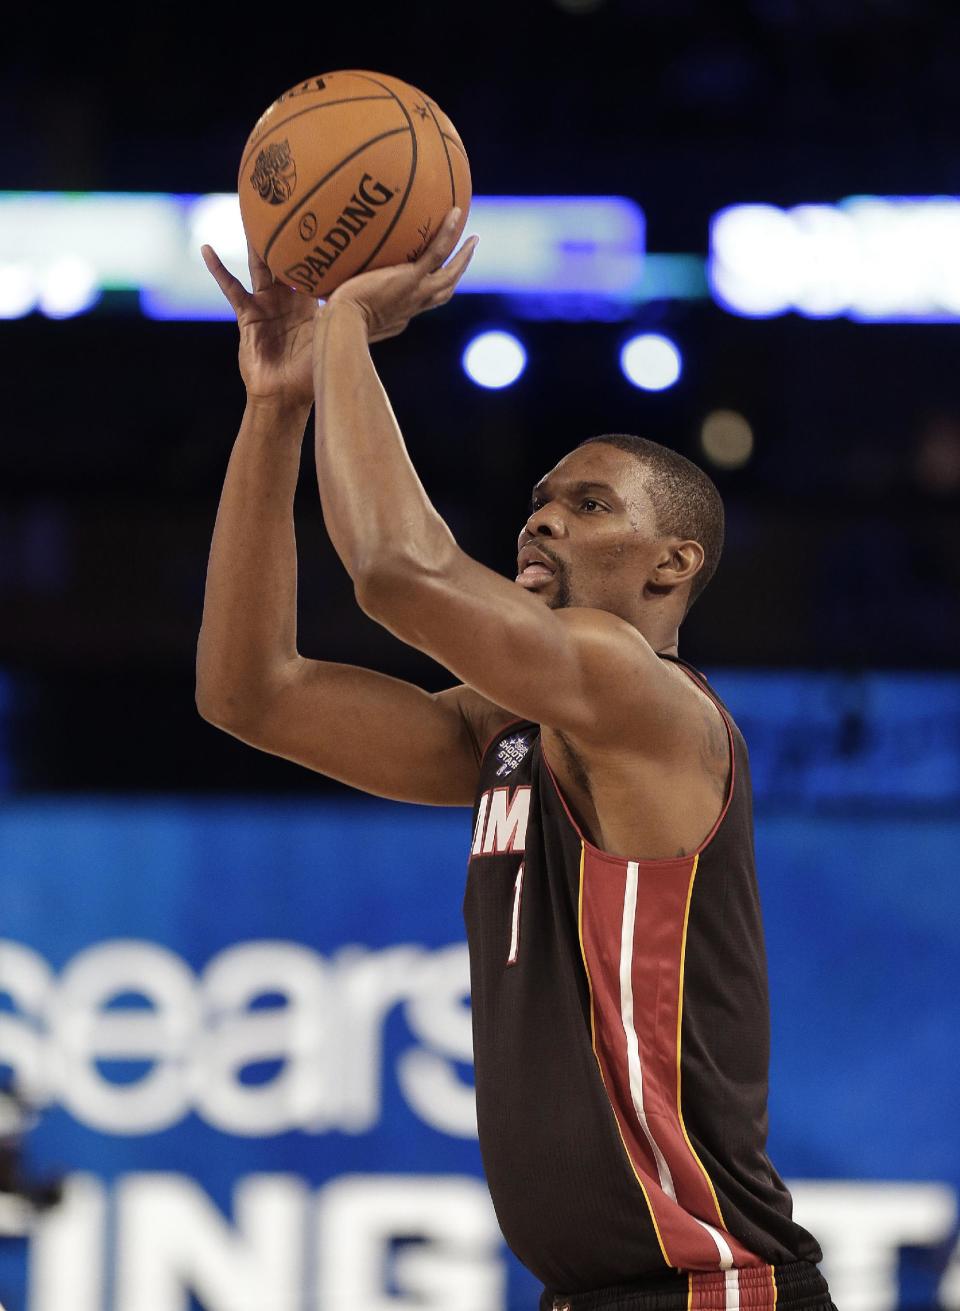 Chris Bosh, of the Miami Heat (1) shoots during the skills competition at the NBA All Star basketball game, Saturday, Feb. 15, 2014, in New Orleans. (AP Photo/Gerald Herbert)